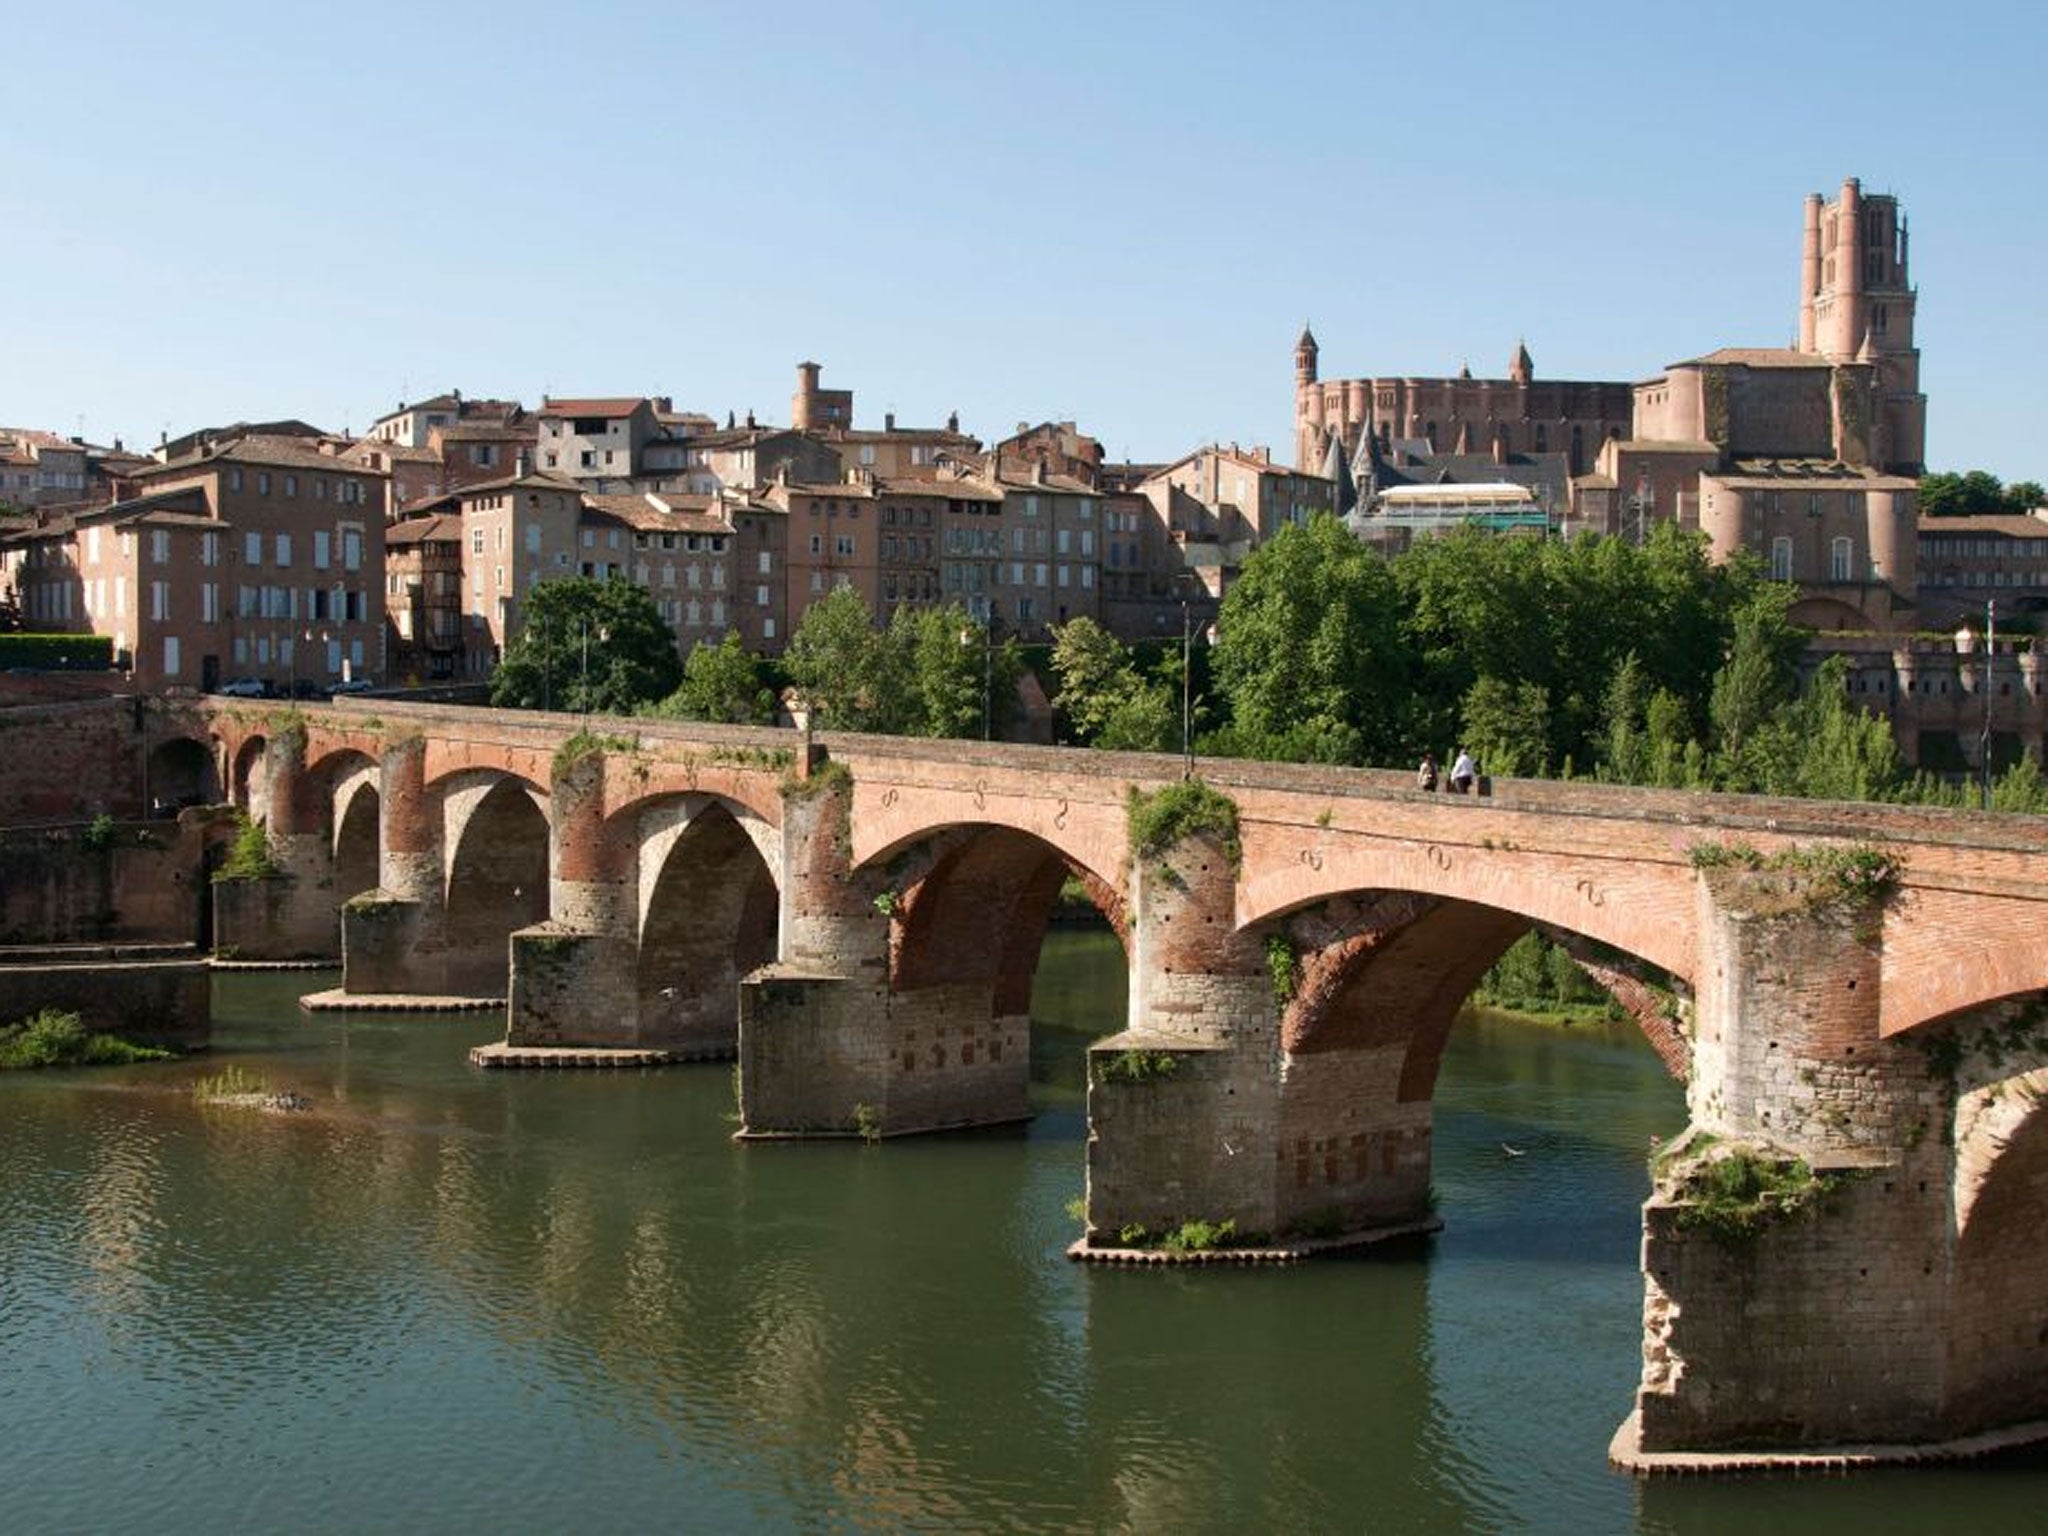 There are two major centres in the Tarn - historic Castres in the south and Albi in the north, with its imposing 13th century red brick cathedral and Toulouse-Lautrec museum